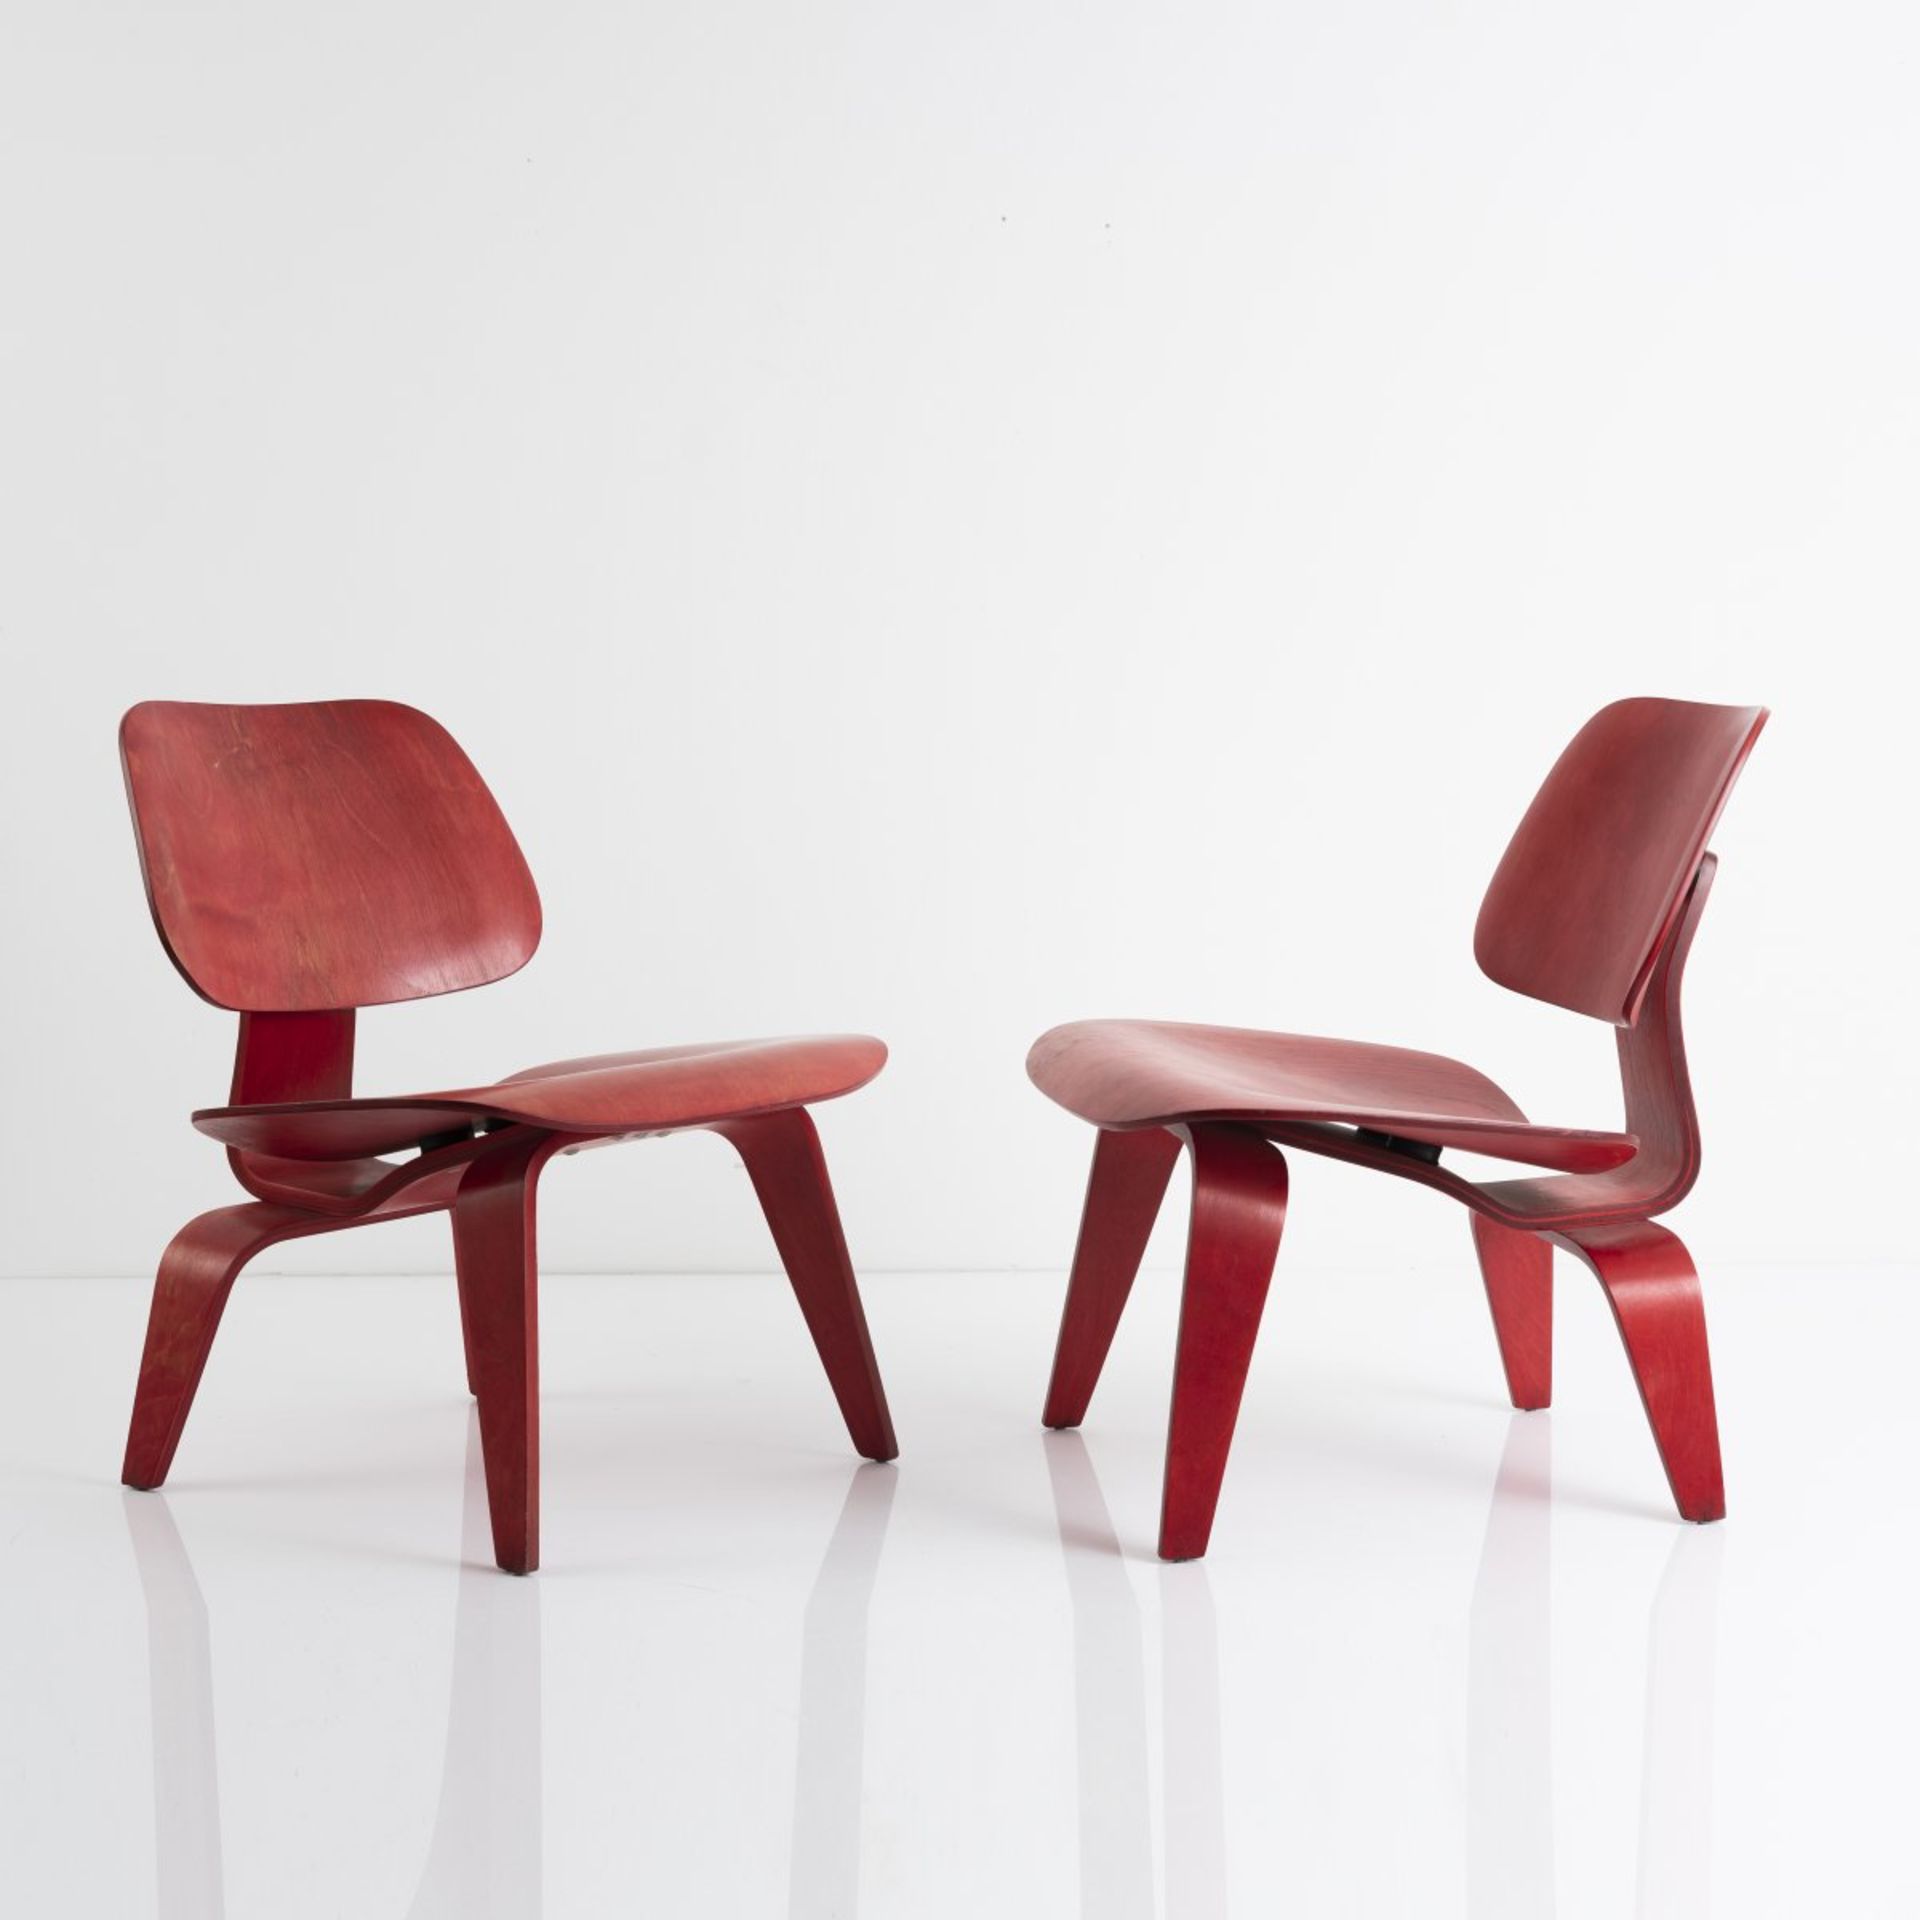 Charles Eames, Zwei Sessel 'LCW - Lounge Chair Wood', 1945/46Zwei Sessel 'LCW - Lounge Chair